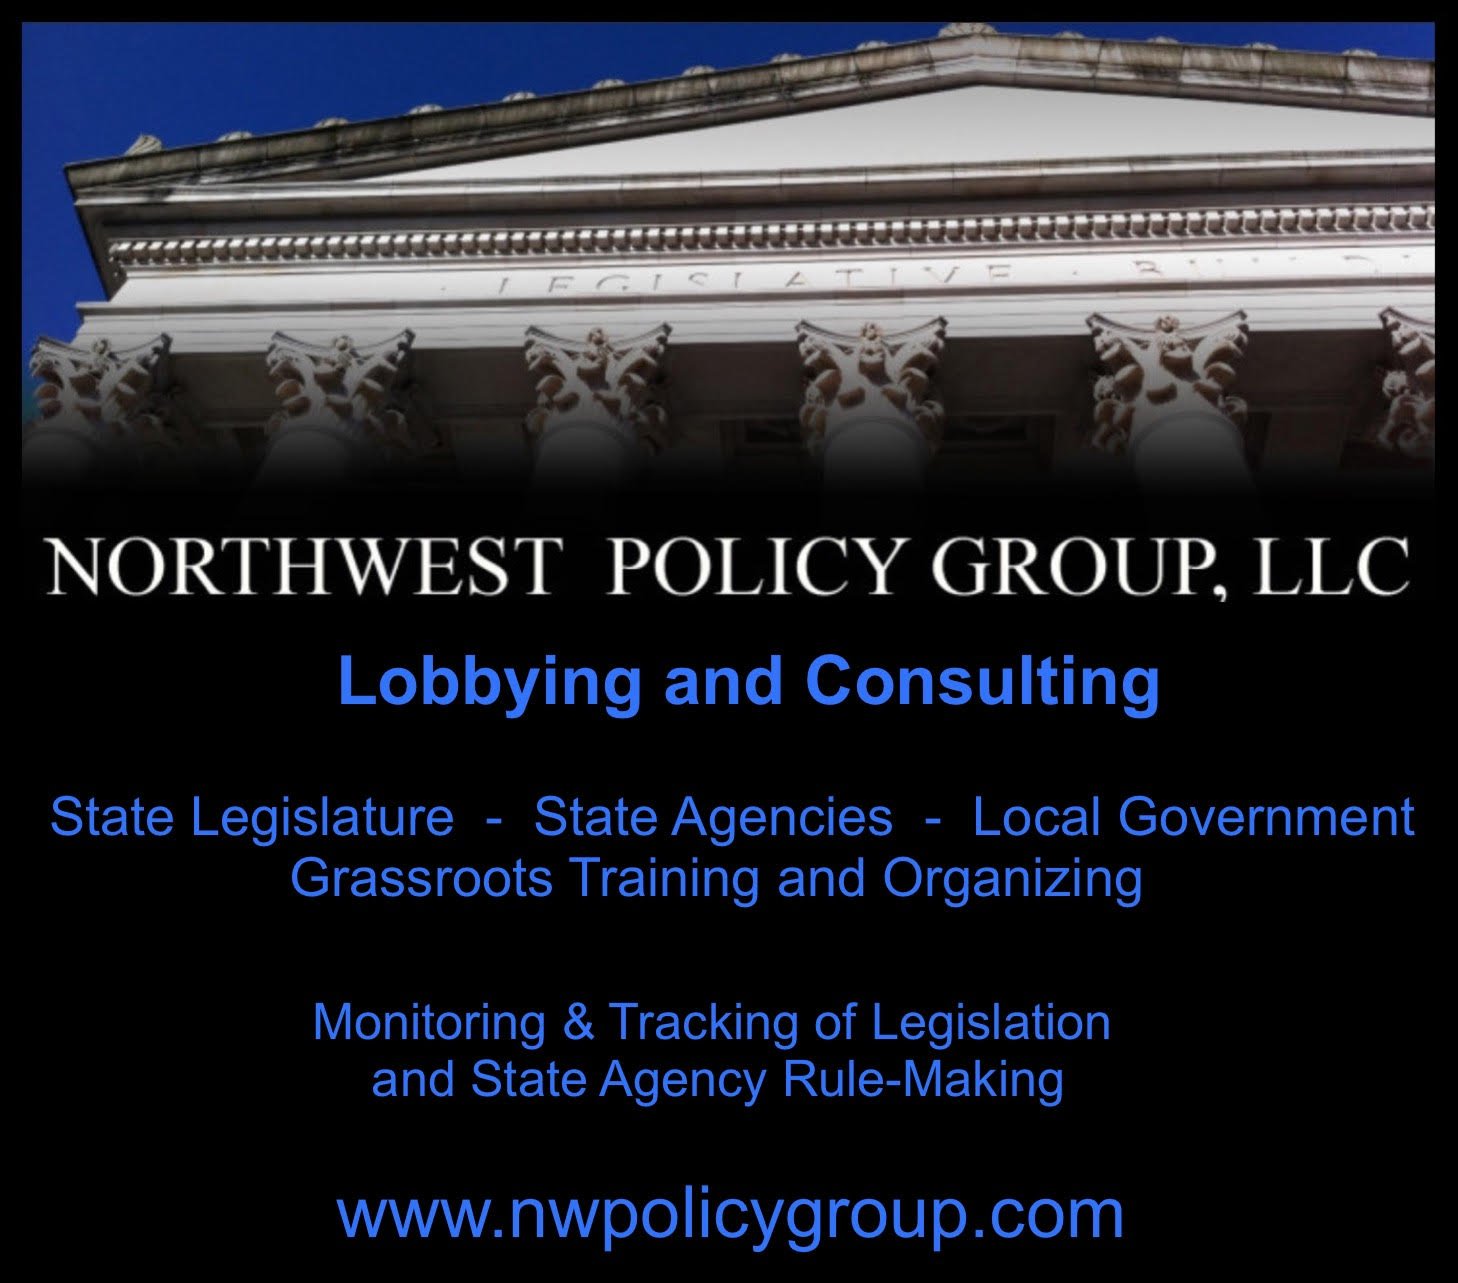  Photo image of the logo for NW Policy Group 